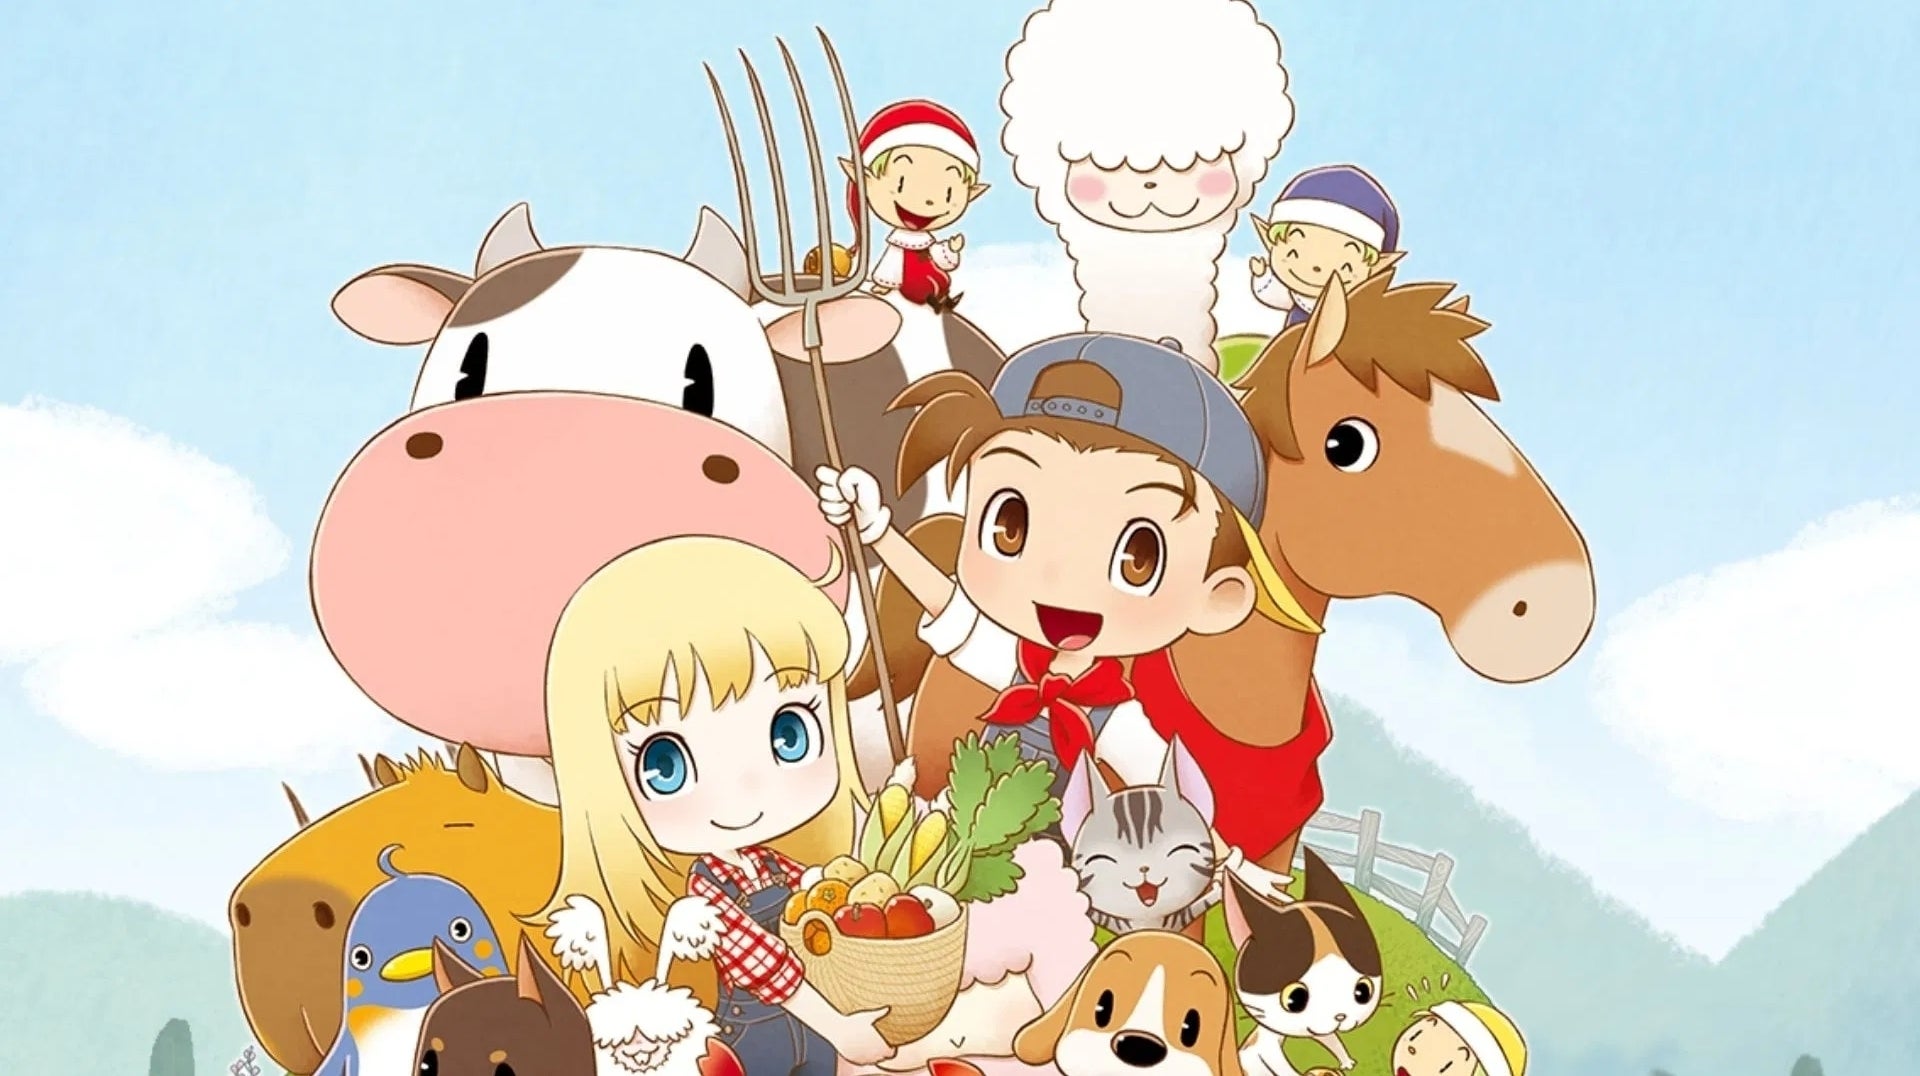 Imagen para Story of Seasons: Friends of Mineral Town llegará a Playstation 4 y Xbox One